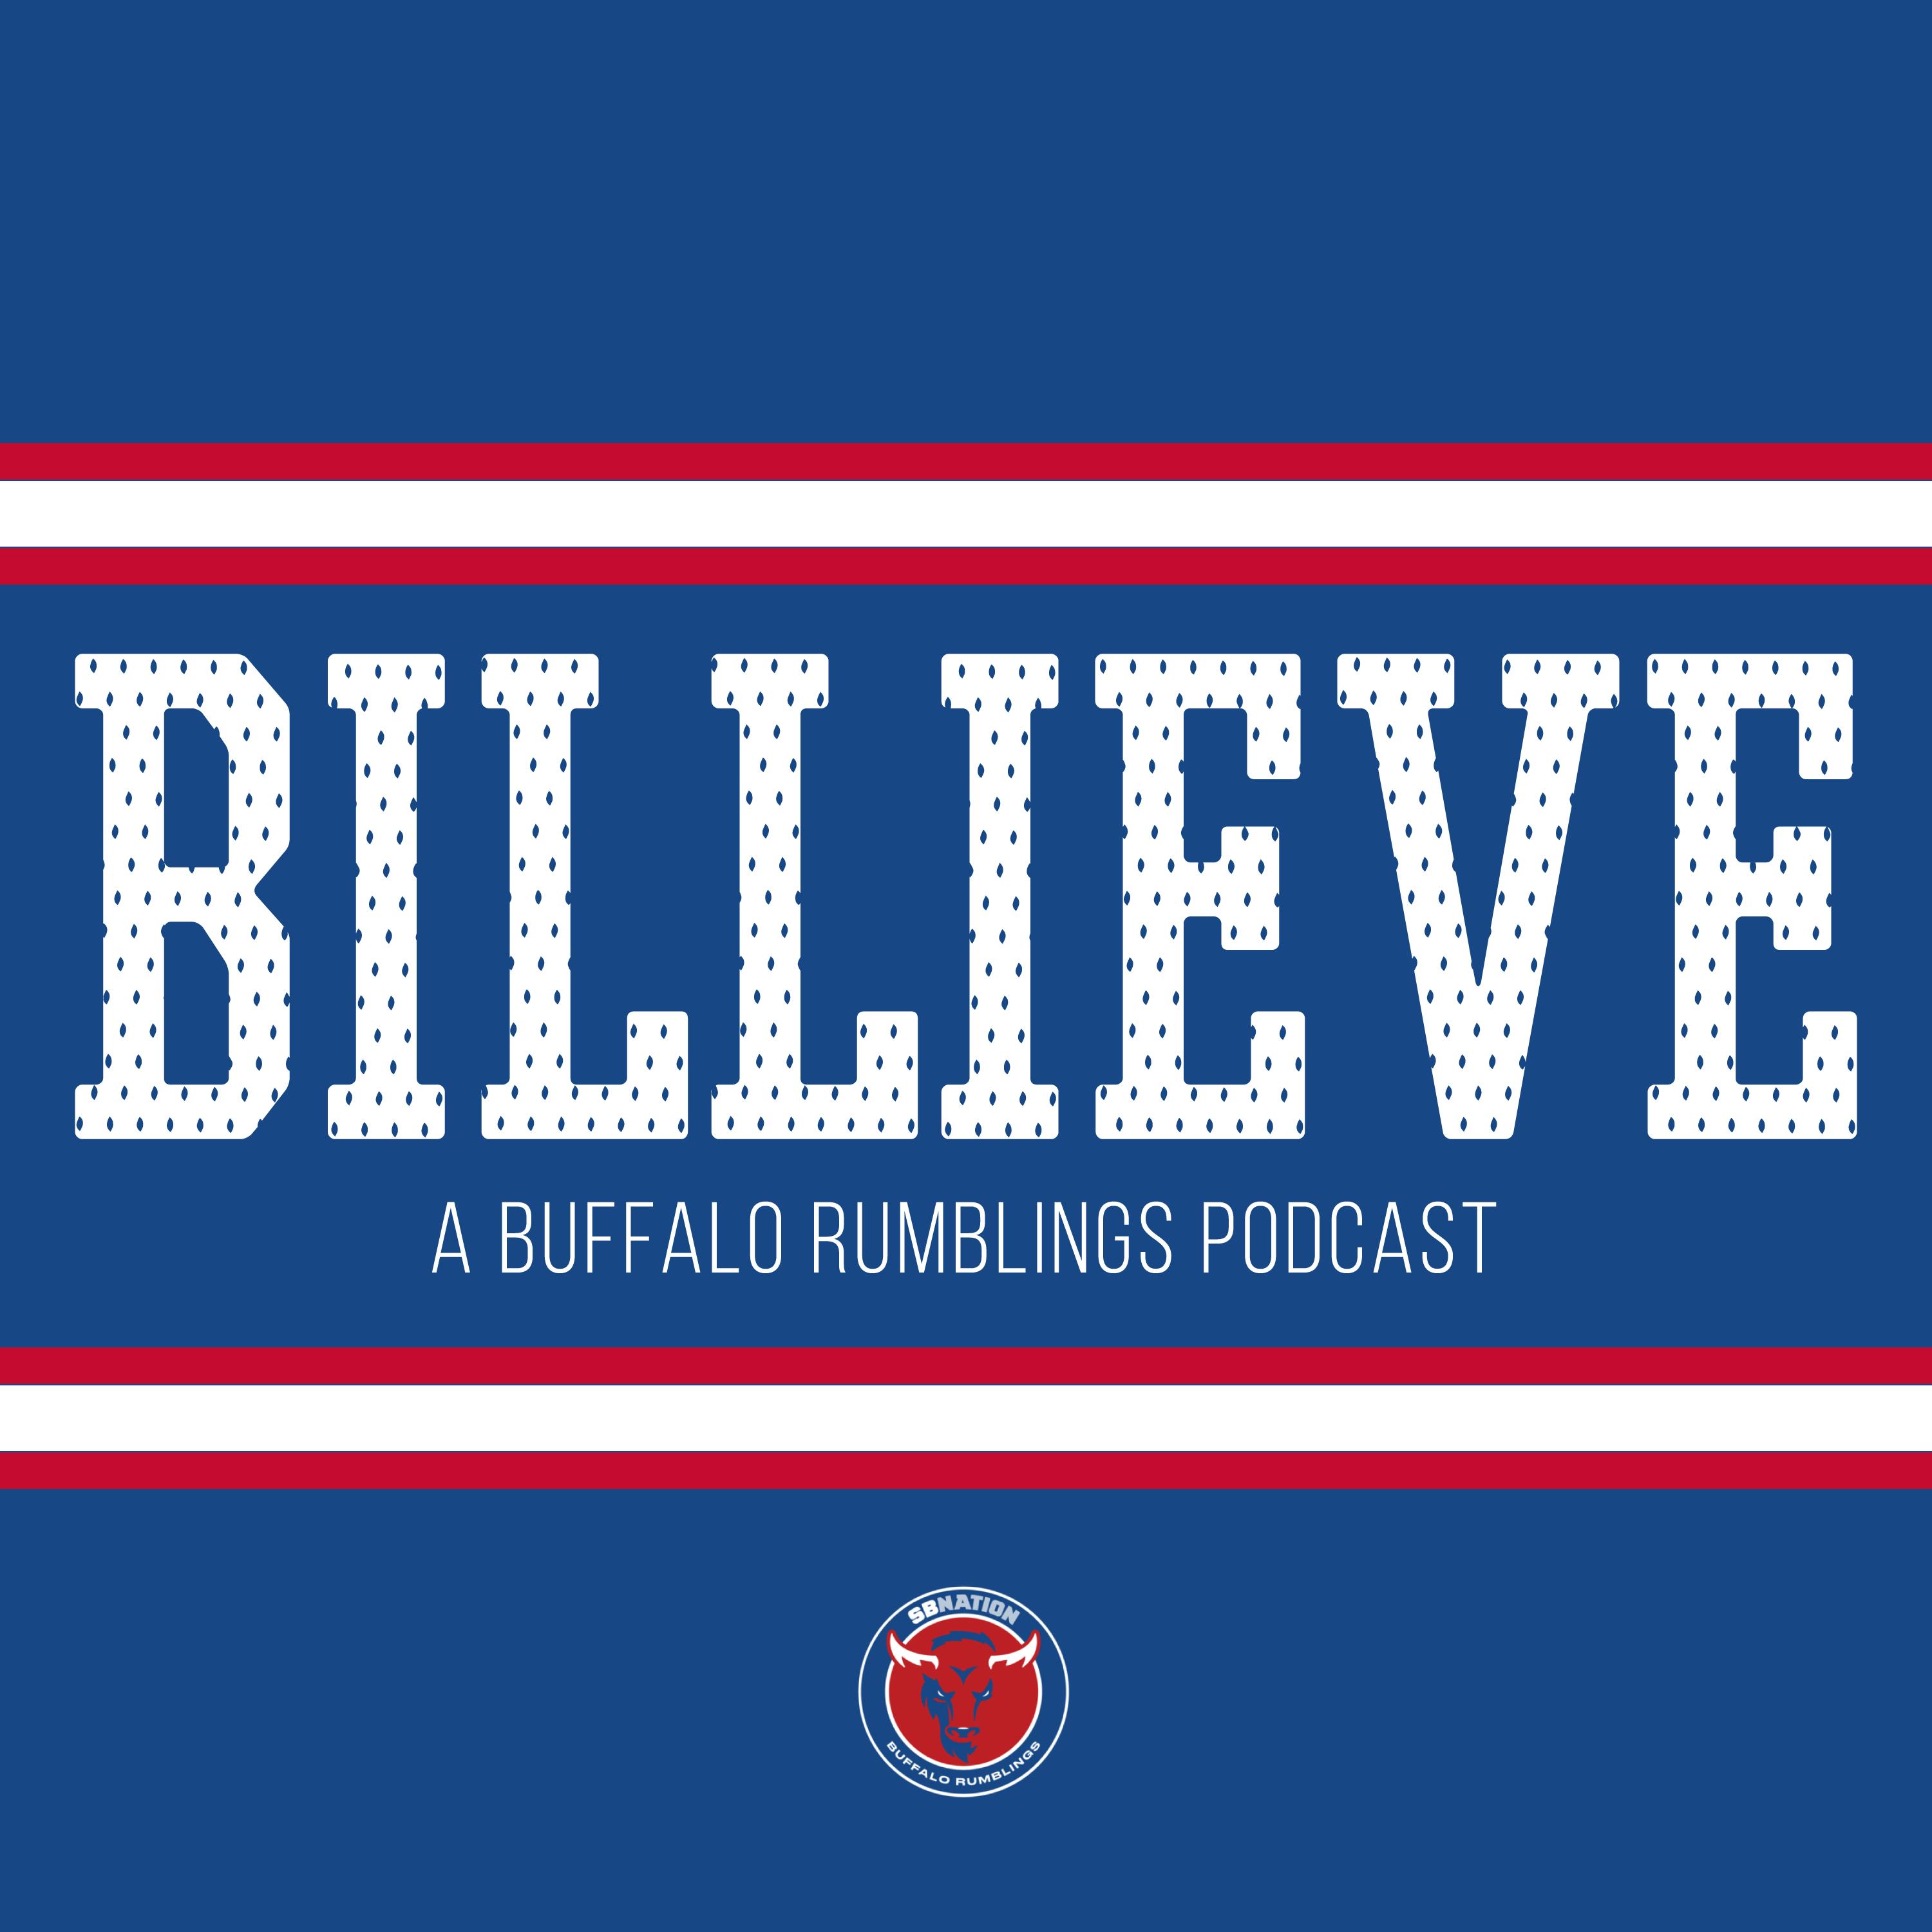 Billieve: Buffalo's Offseason Hits and Misses